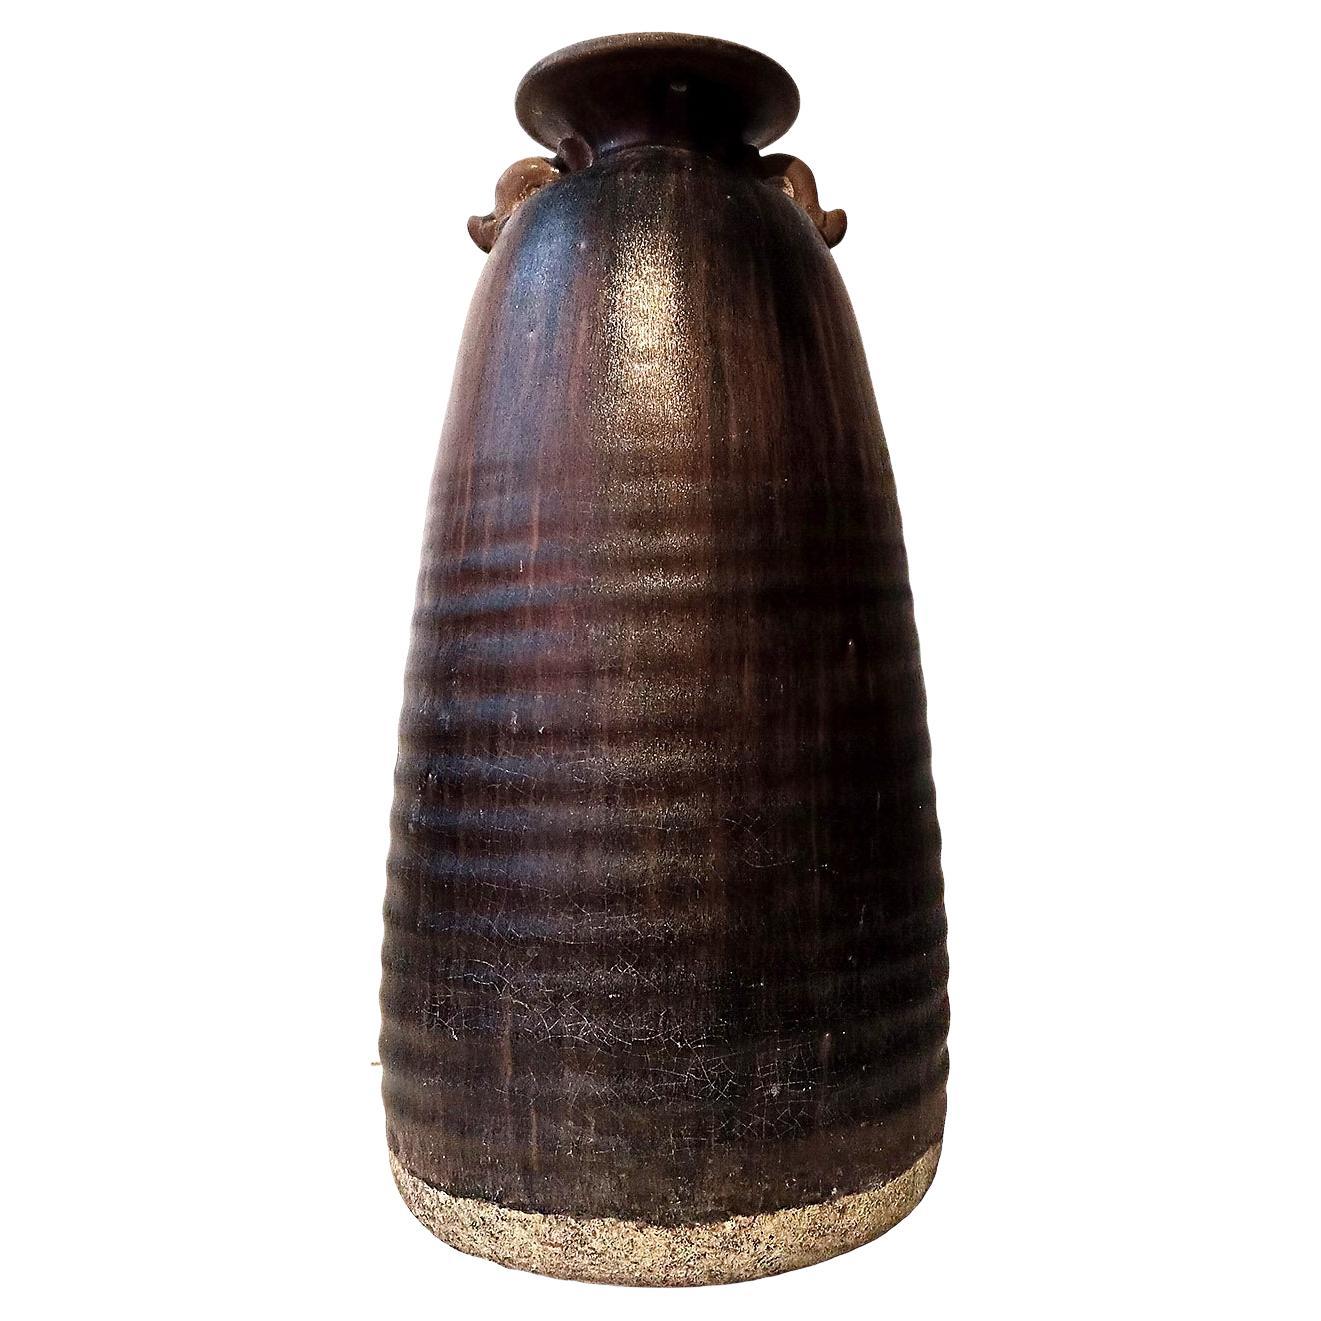 Tall Ceramic Thai Vase in Brown Mottled Glaze, with Looped Handles